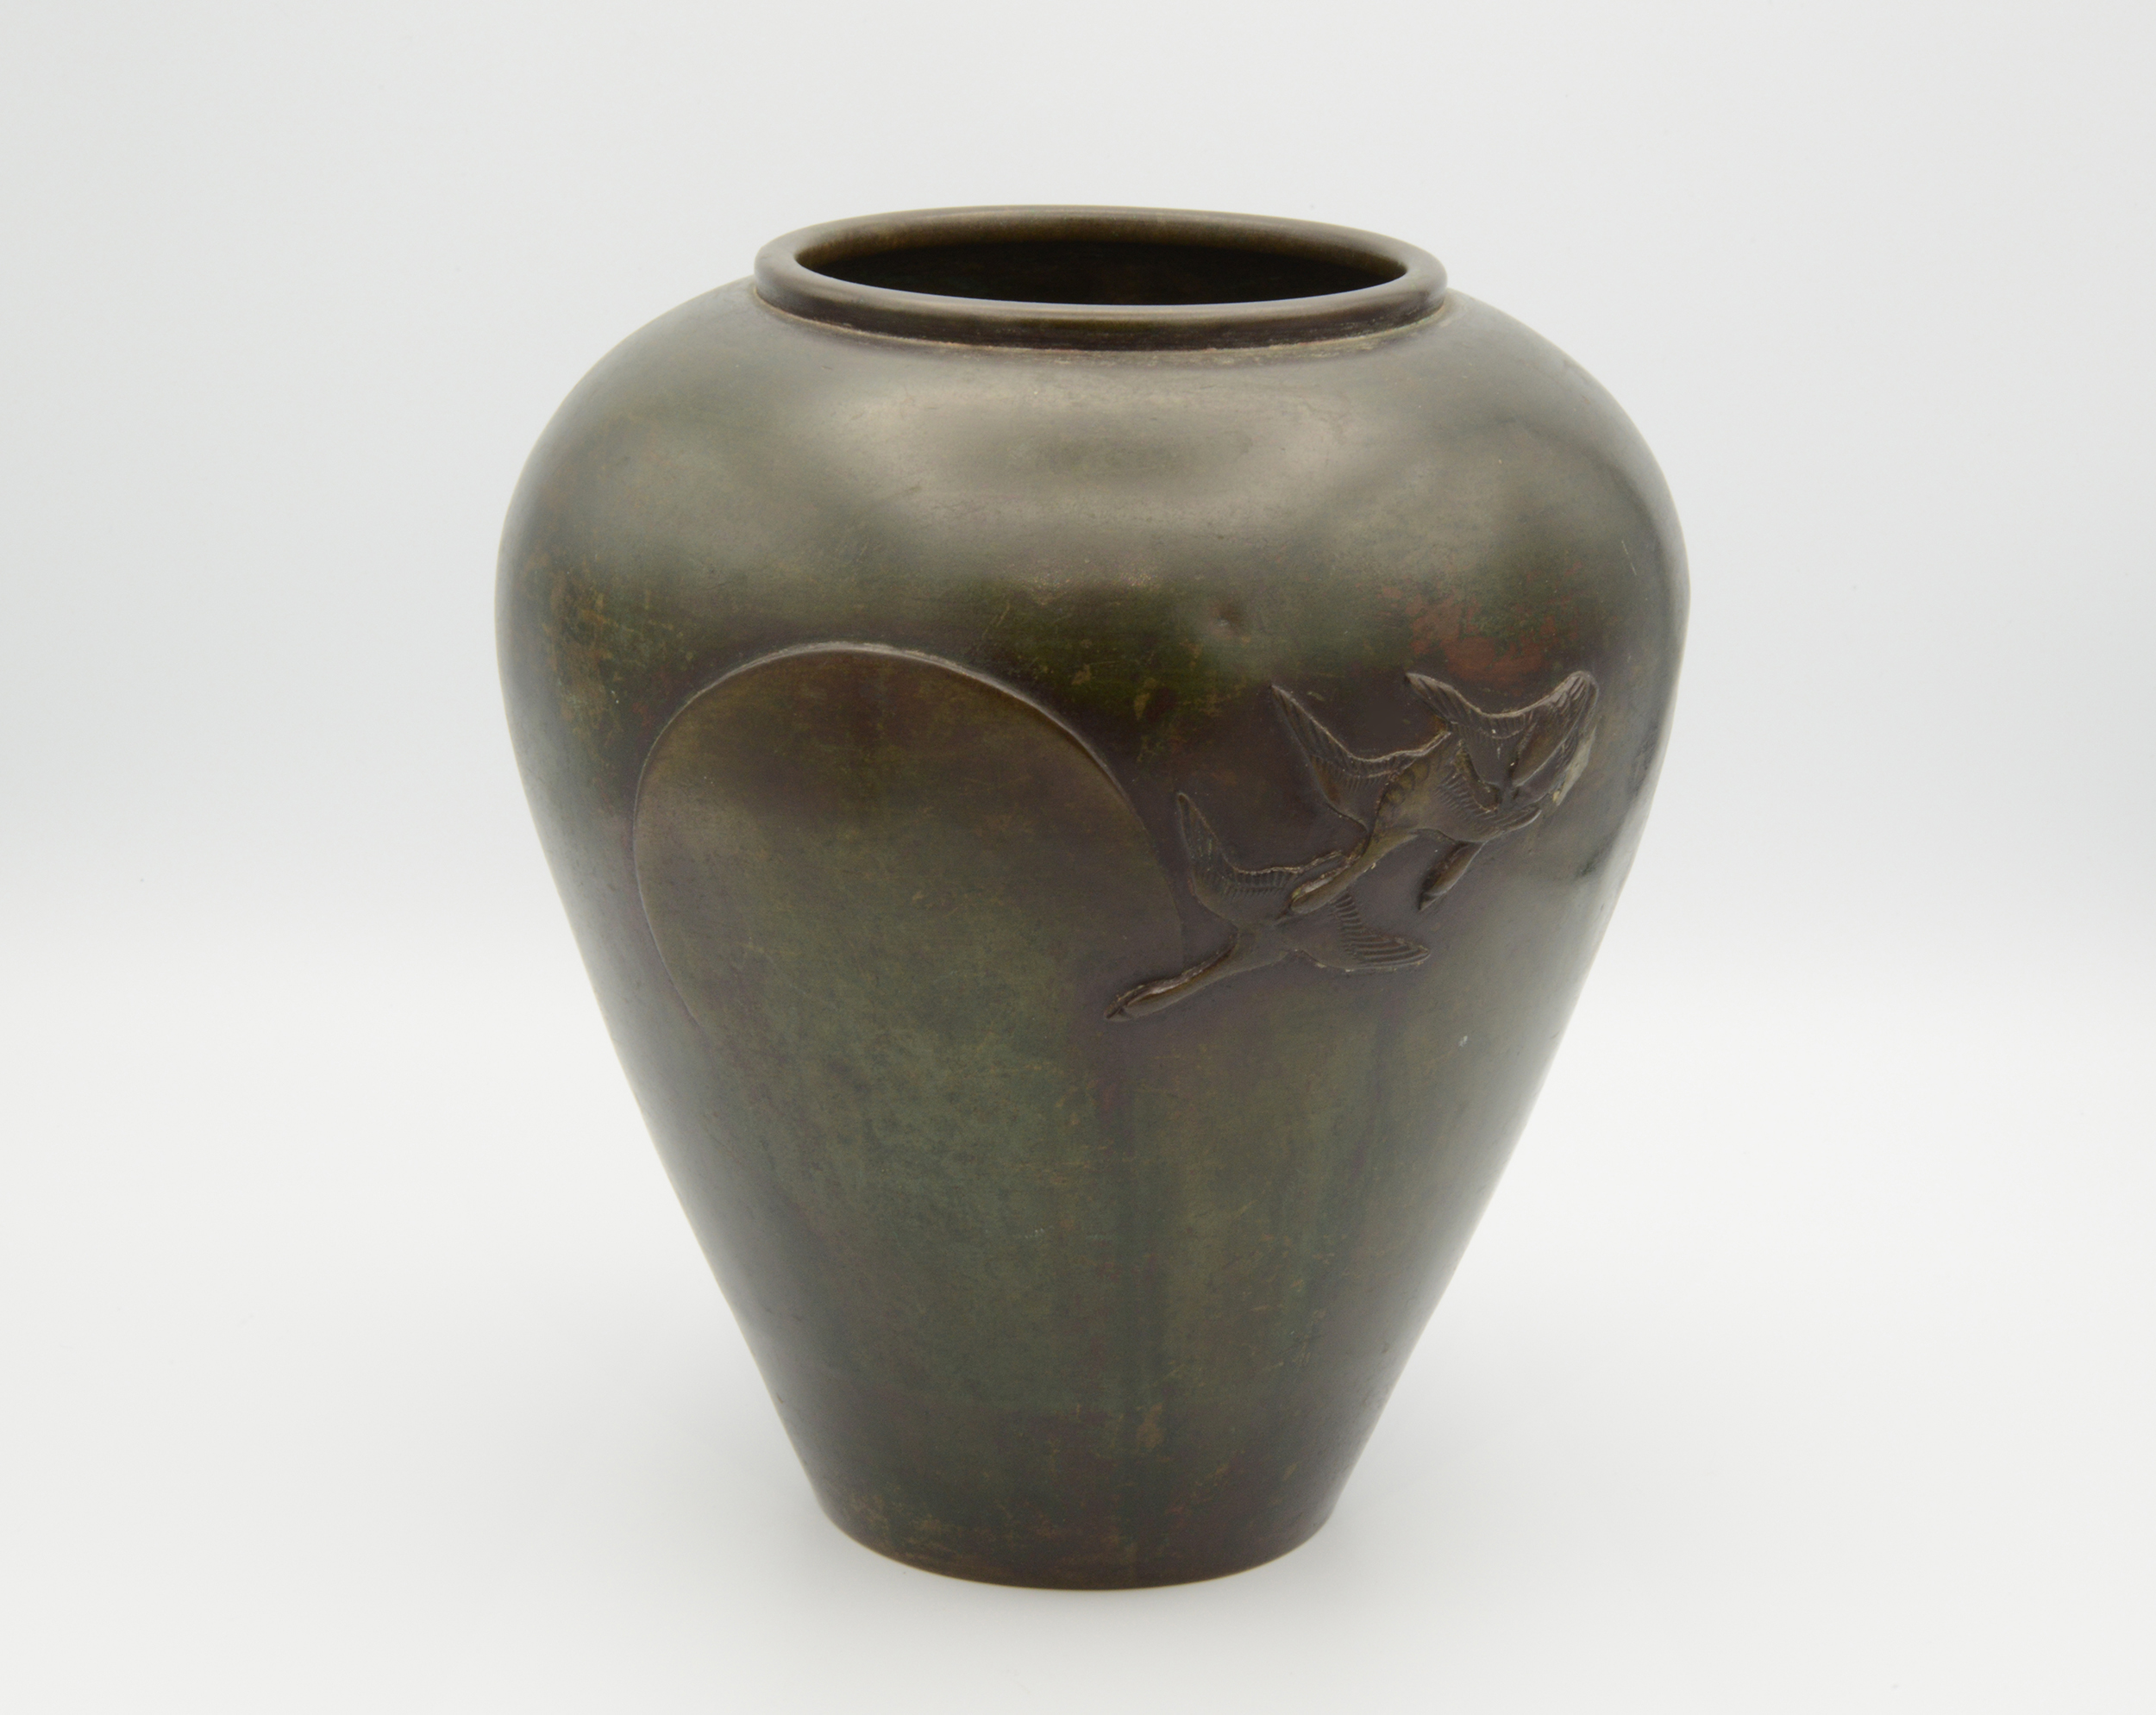 A JAPANESE BRONZE VASE WITH GEESE, MEIJI PERIOD, 1868 – 1912